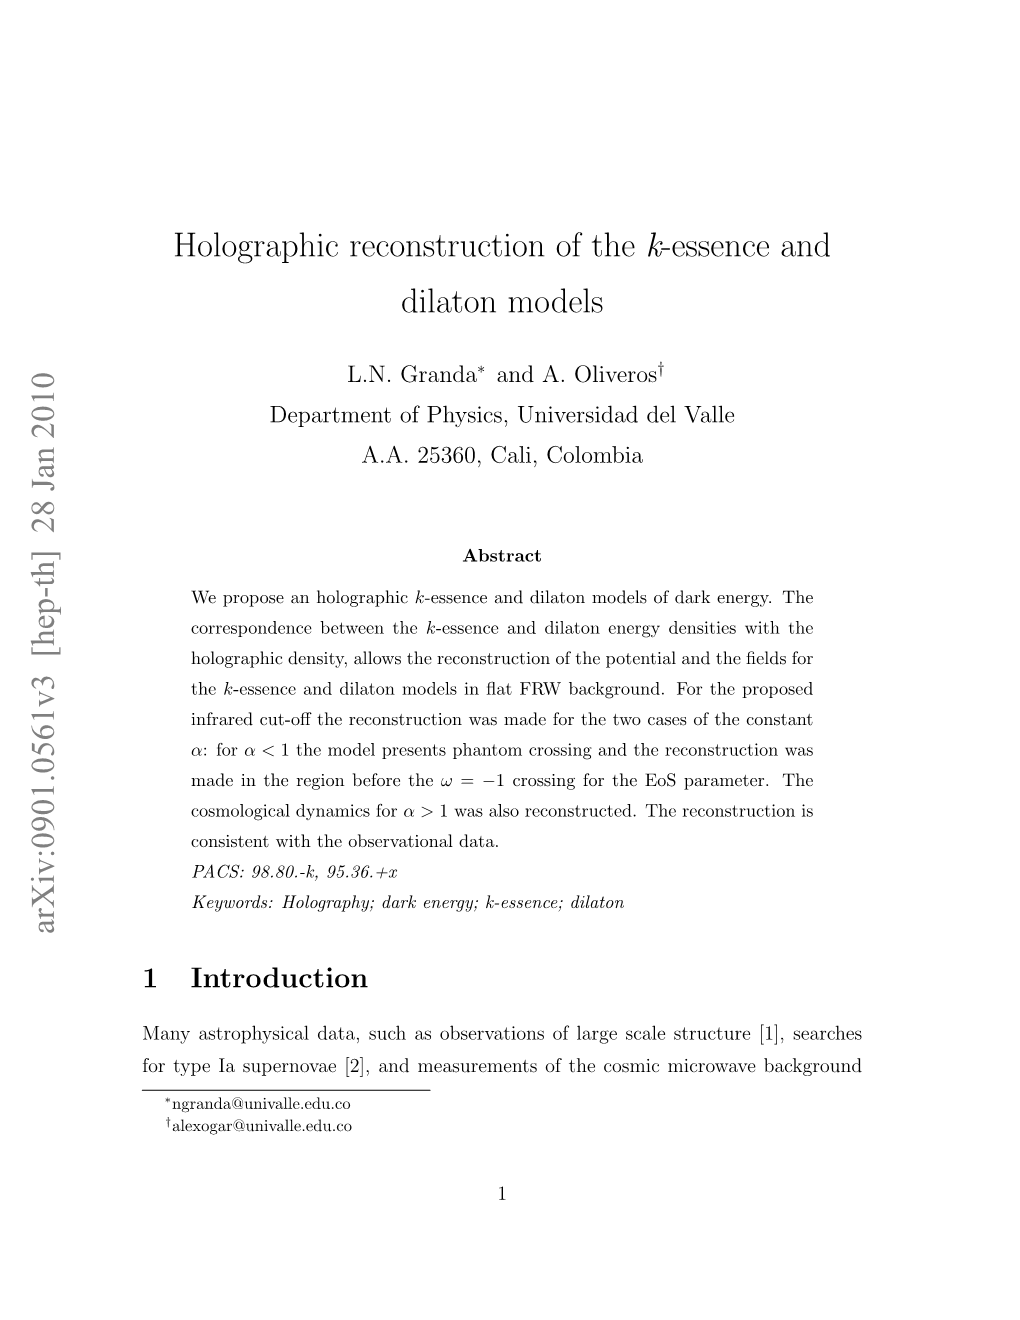 Holographic Reconstruction of the K-Essence and Dilaton Models Arxiv